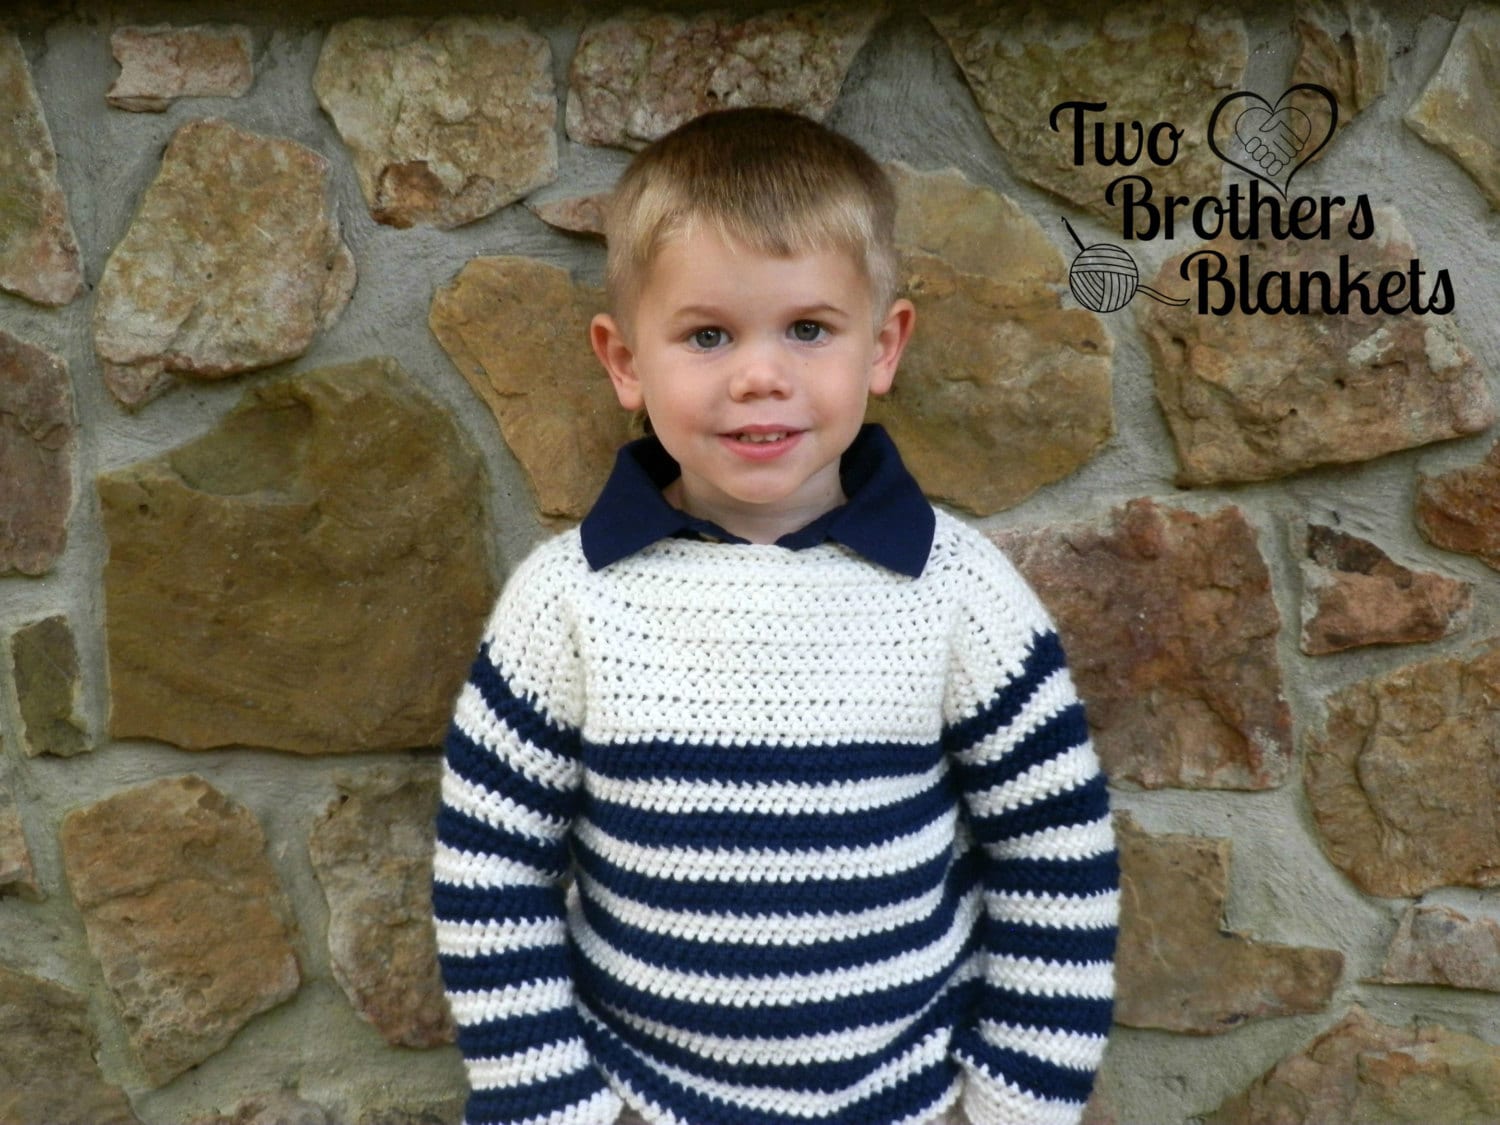 How to Block Crochet Tops and Sweaters - Two Brothers Blankets